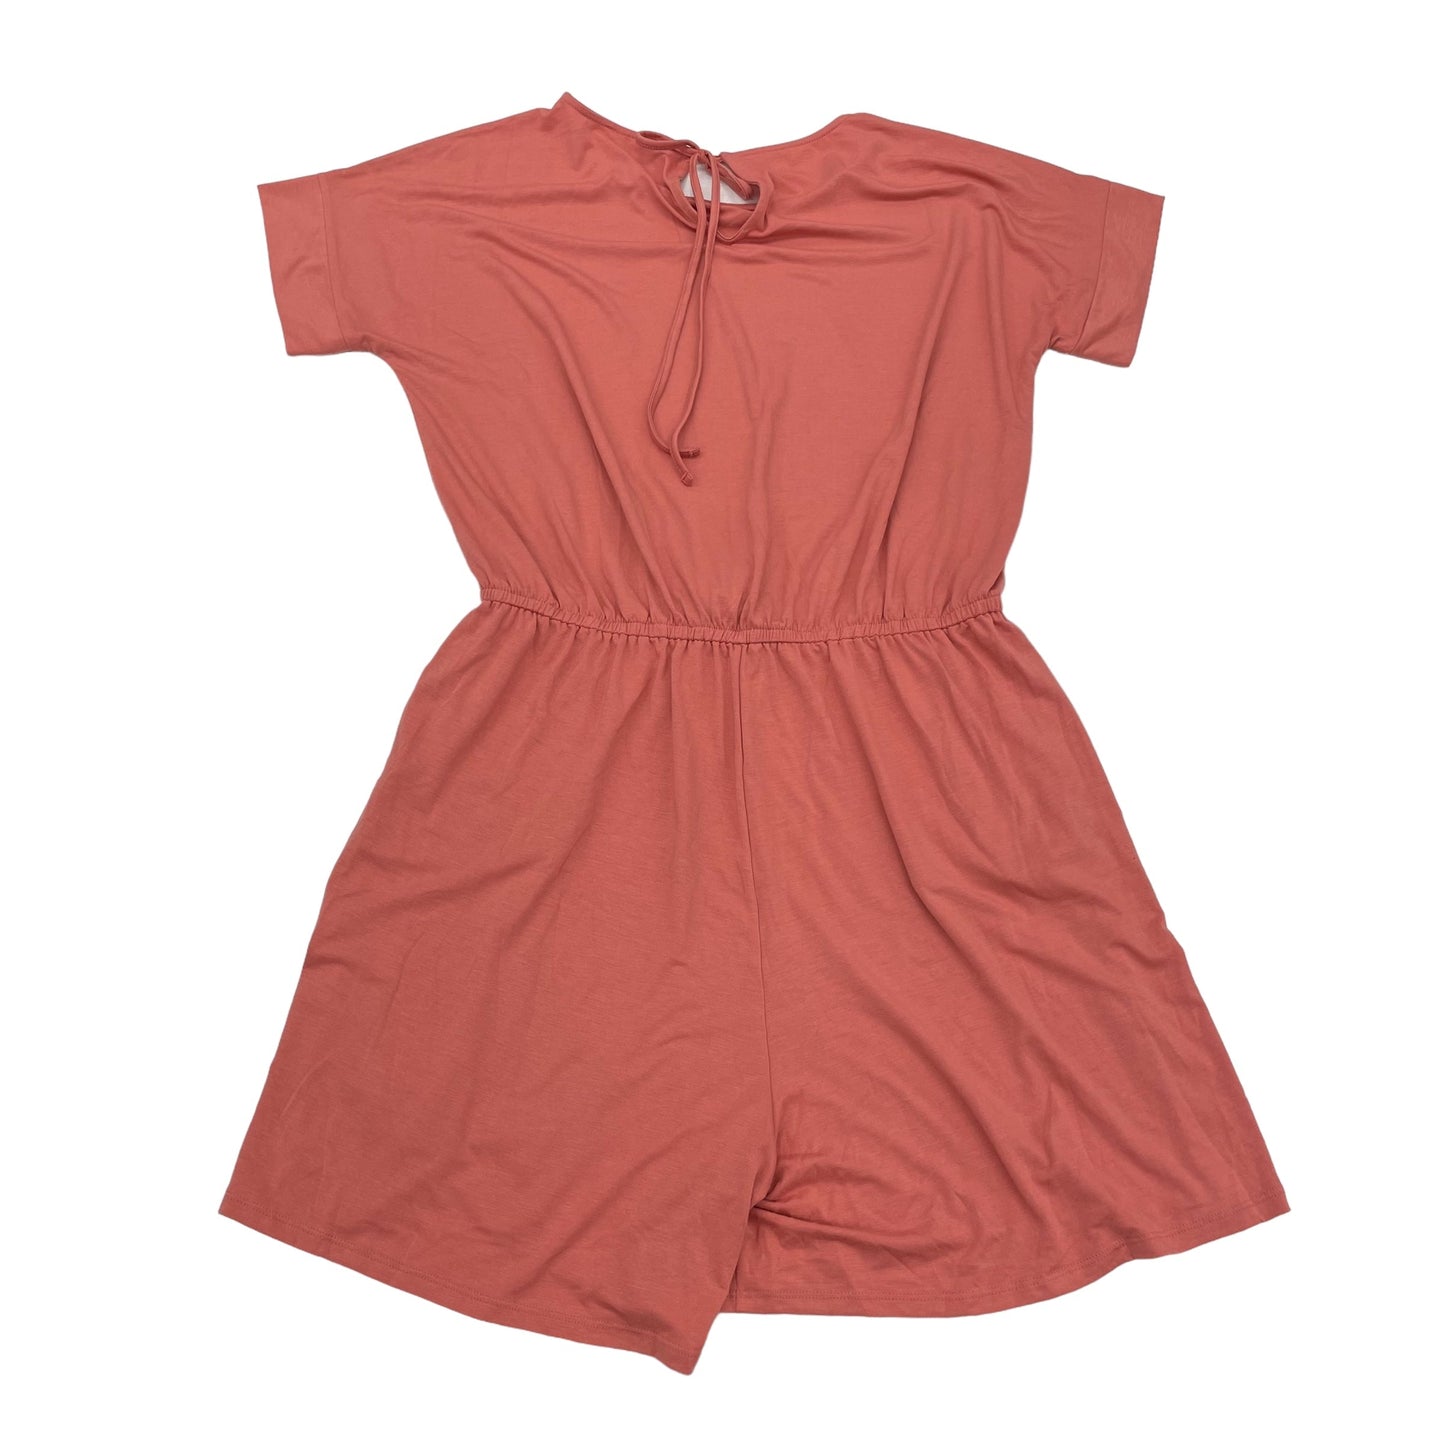 PINK ZENANA OUTFITTERS ROMPER, Size 2X